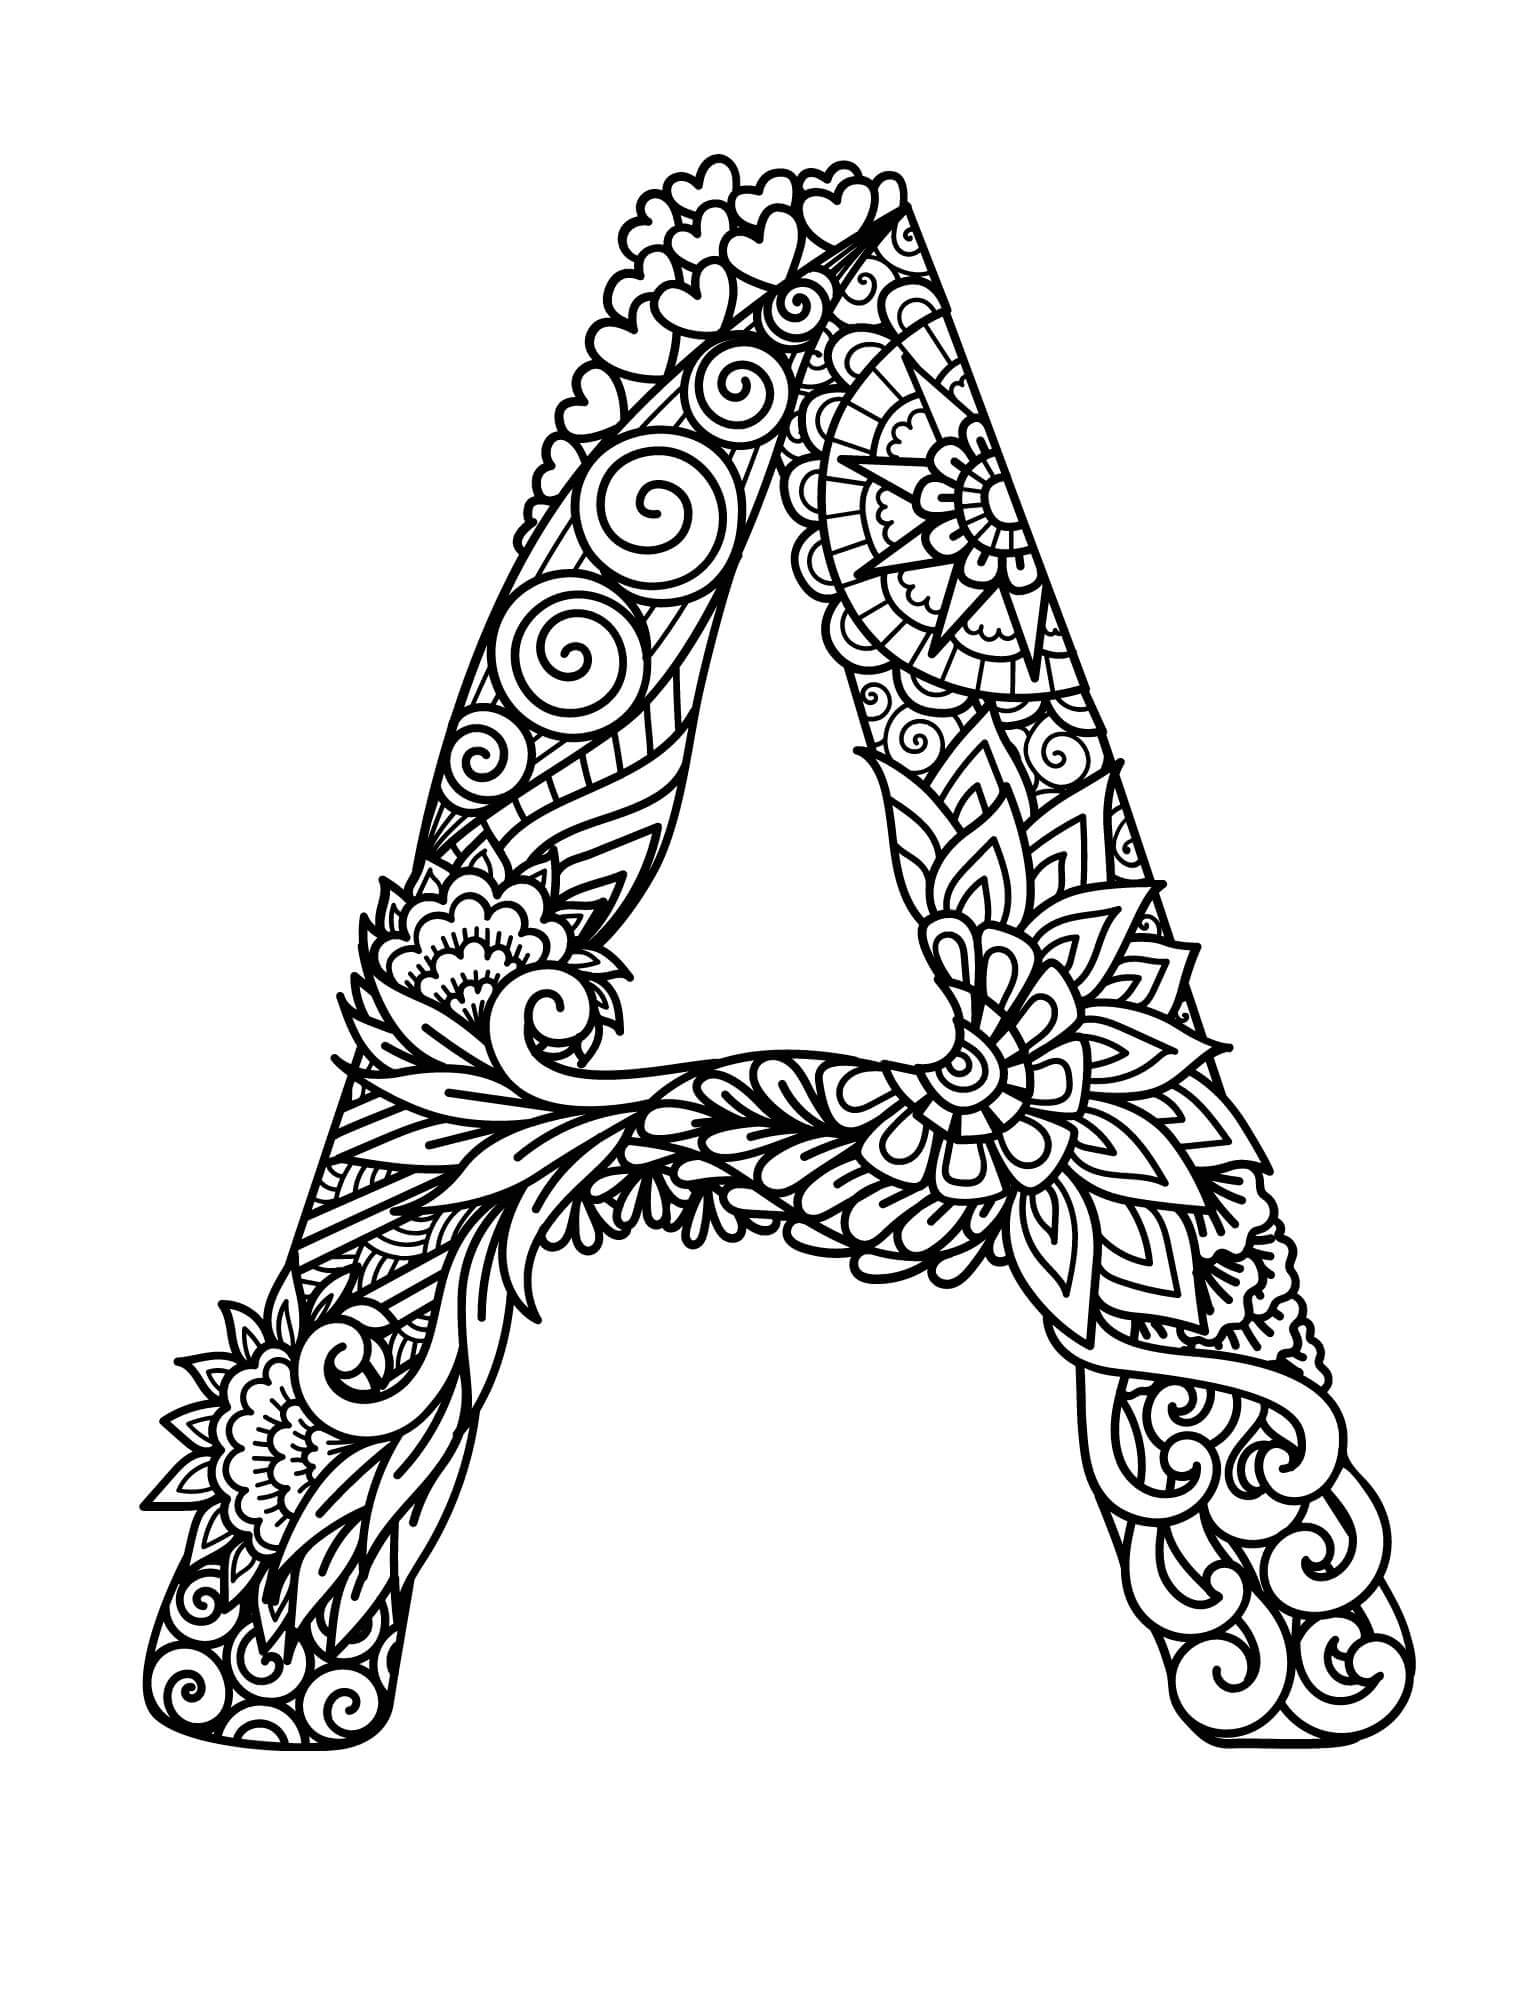 Mandala Letter A Coloring Page - Sheet 1 - Download, Print Now!